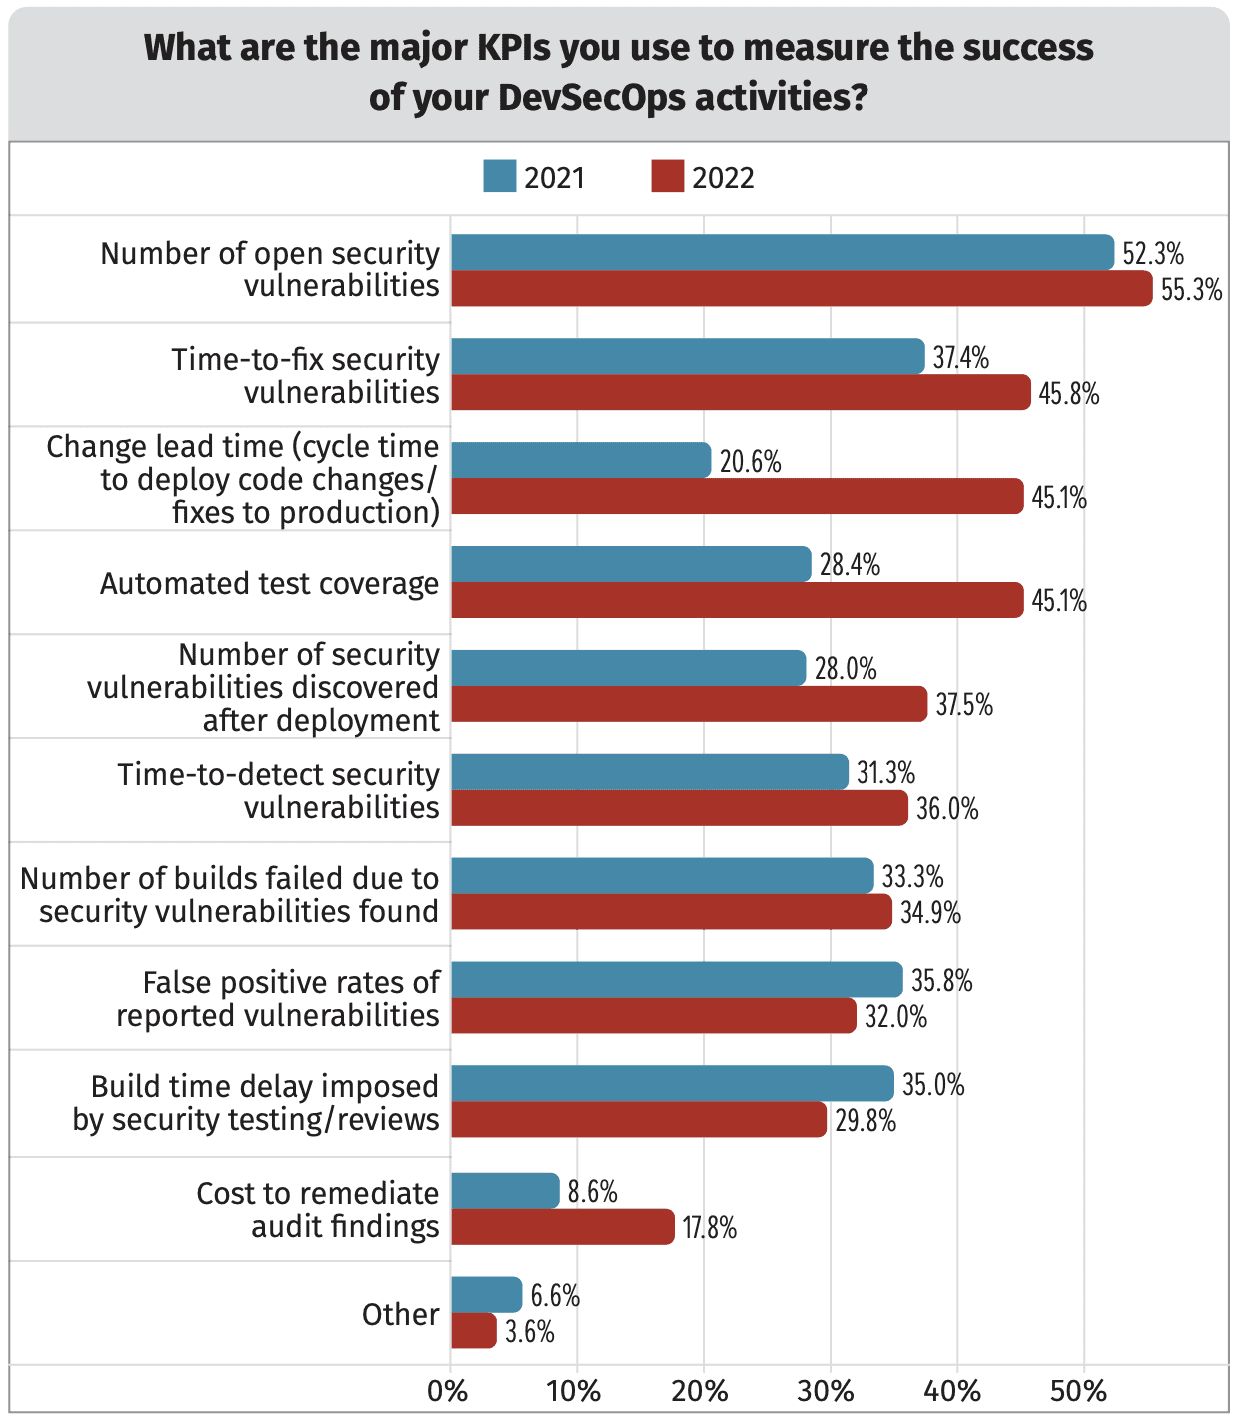 Chart showing major KPIs respondents use to measure the success of their DevSecOps activities in 2021 and 2022